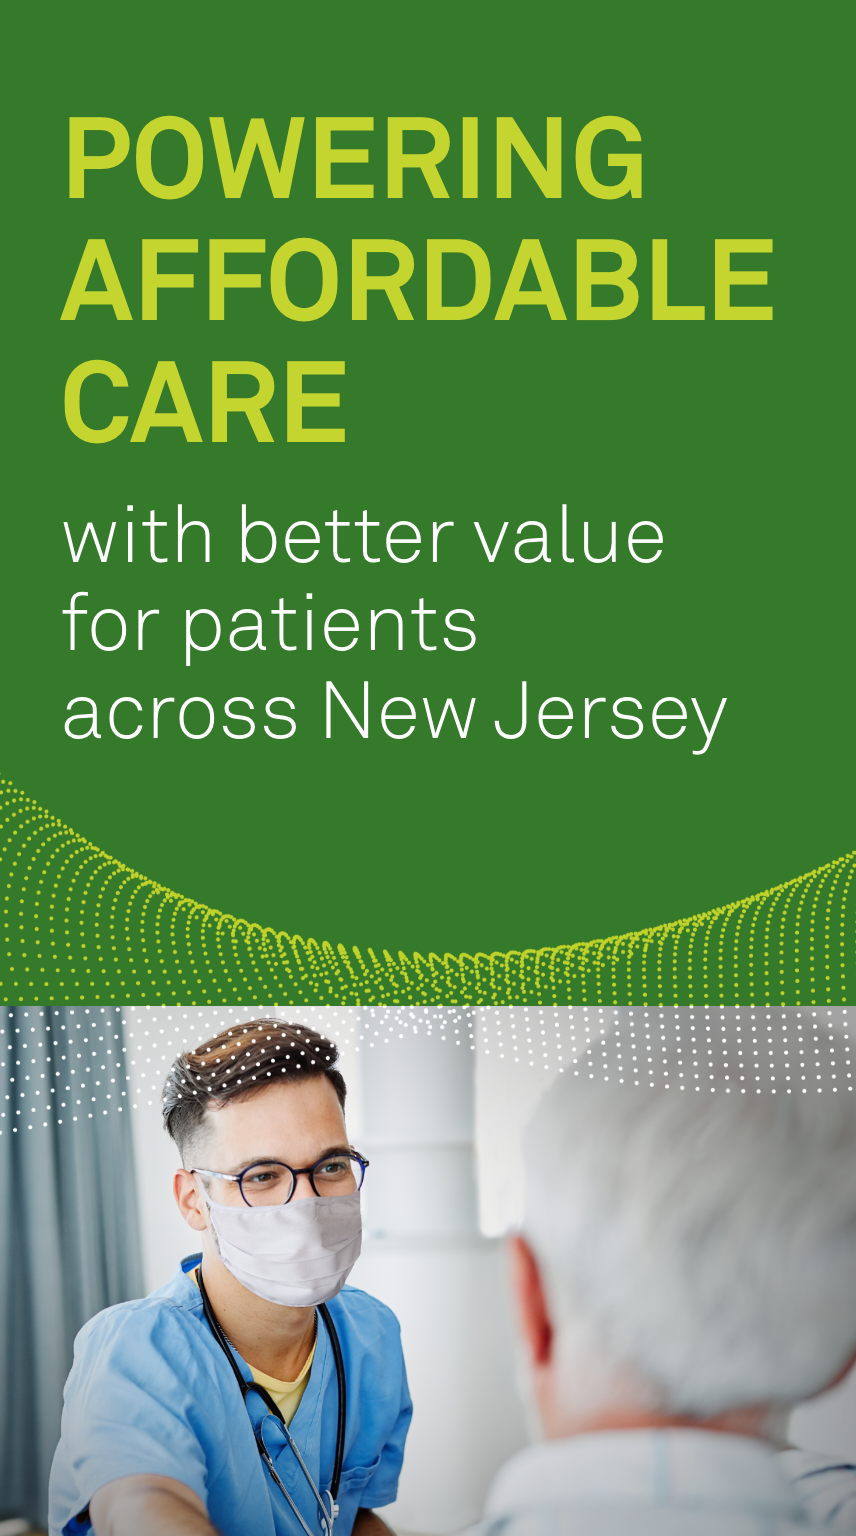 Powering affordable care with better value for patients across New Jersey